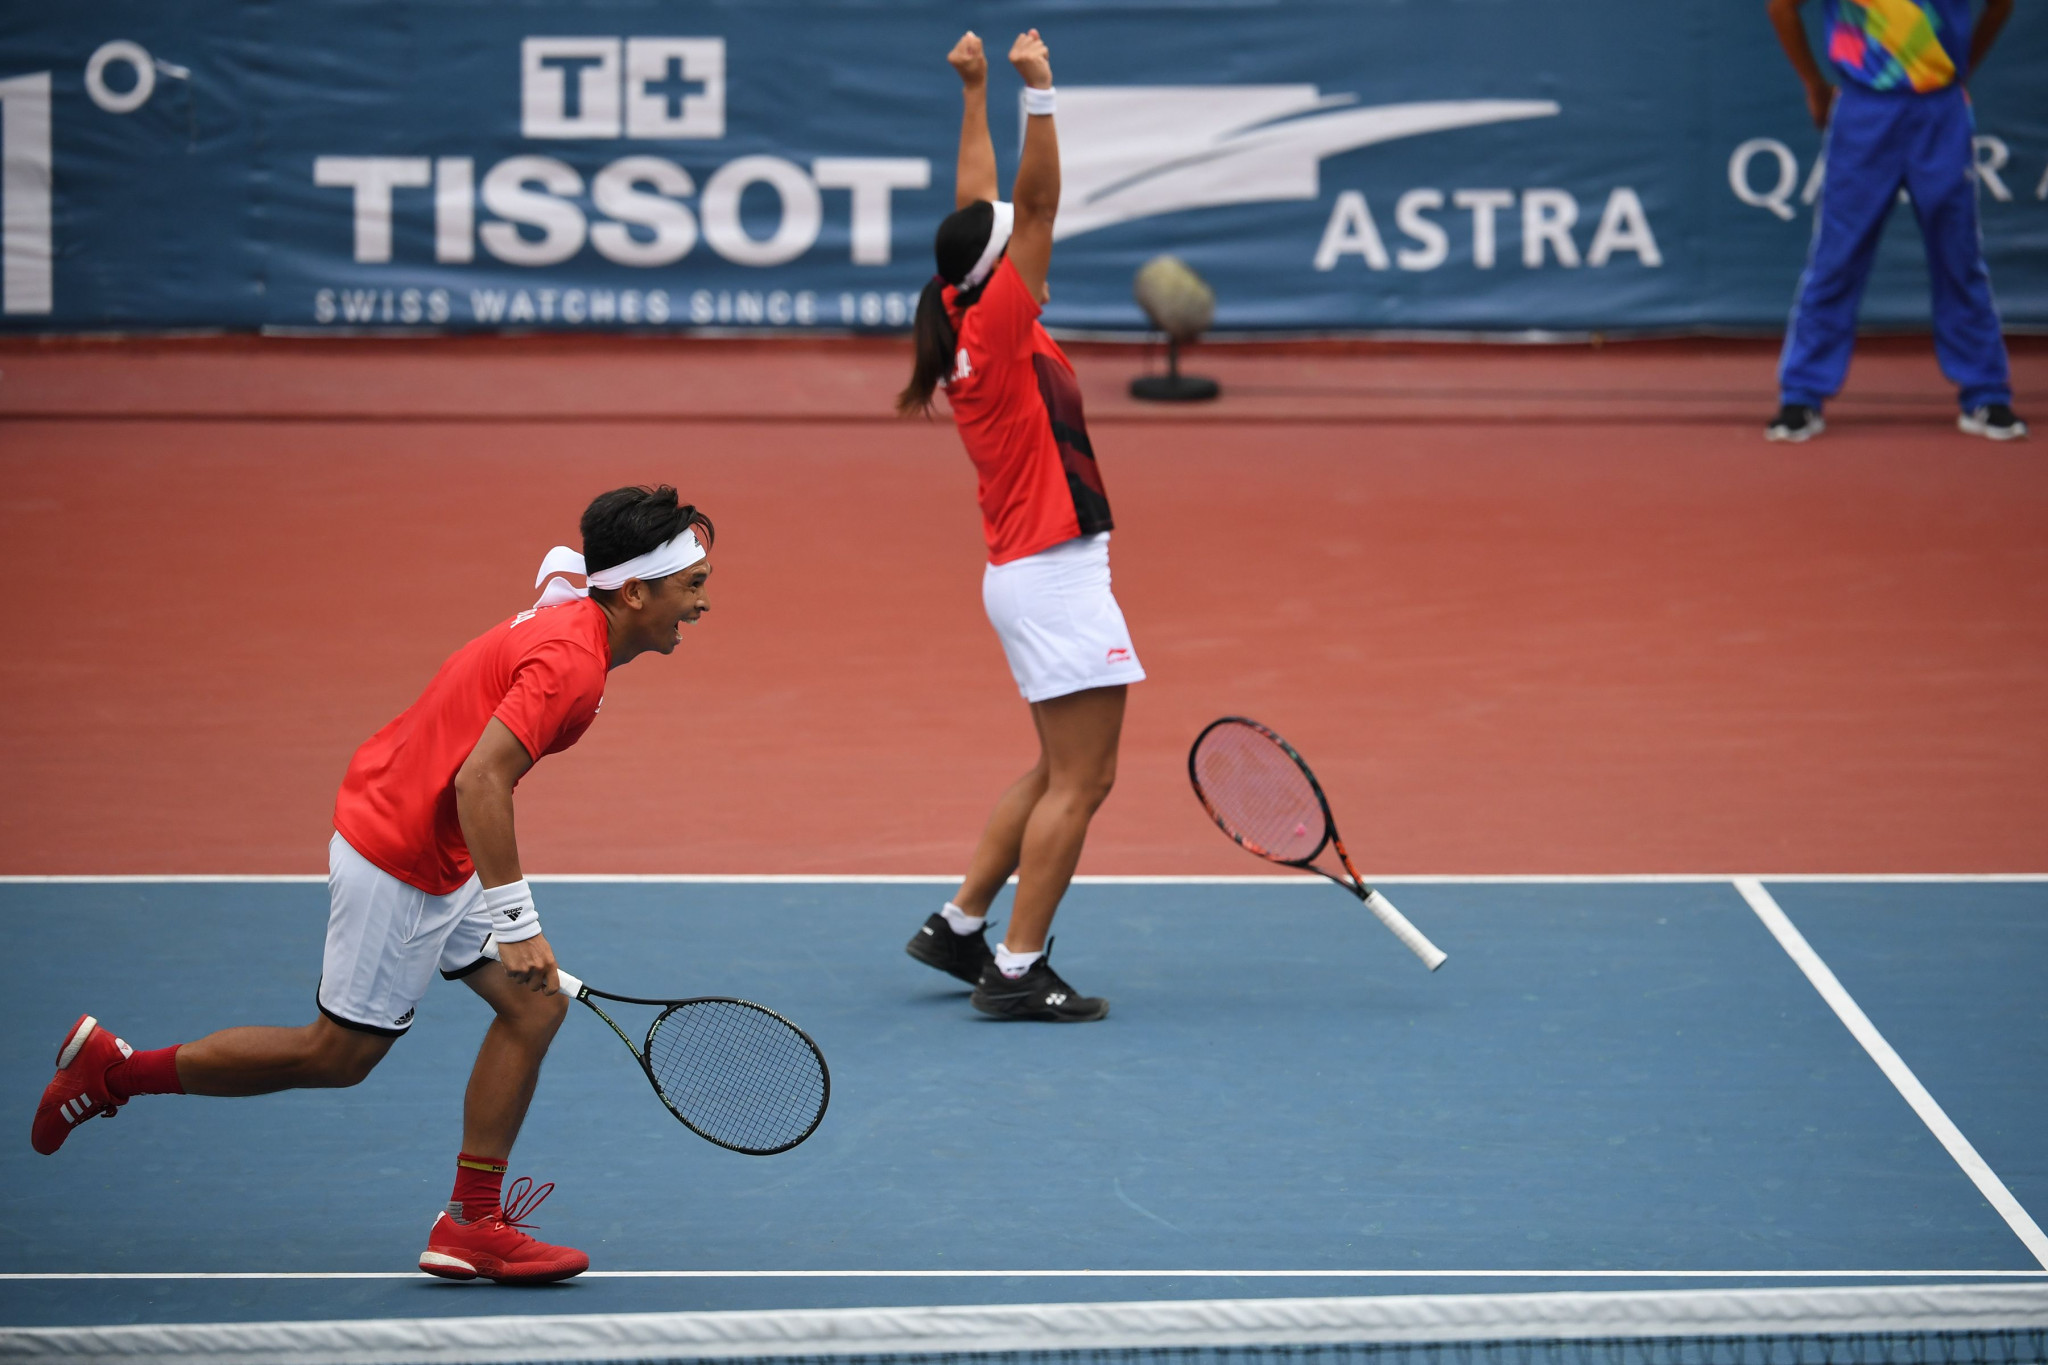 Indonesia won their 10th gold of the Games thanks to doubles tennis team Christopher Rungkat and Aldila Sutjiadi  ©Getty Images